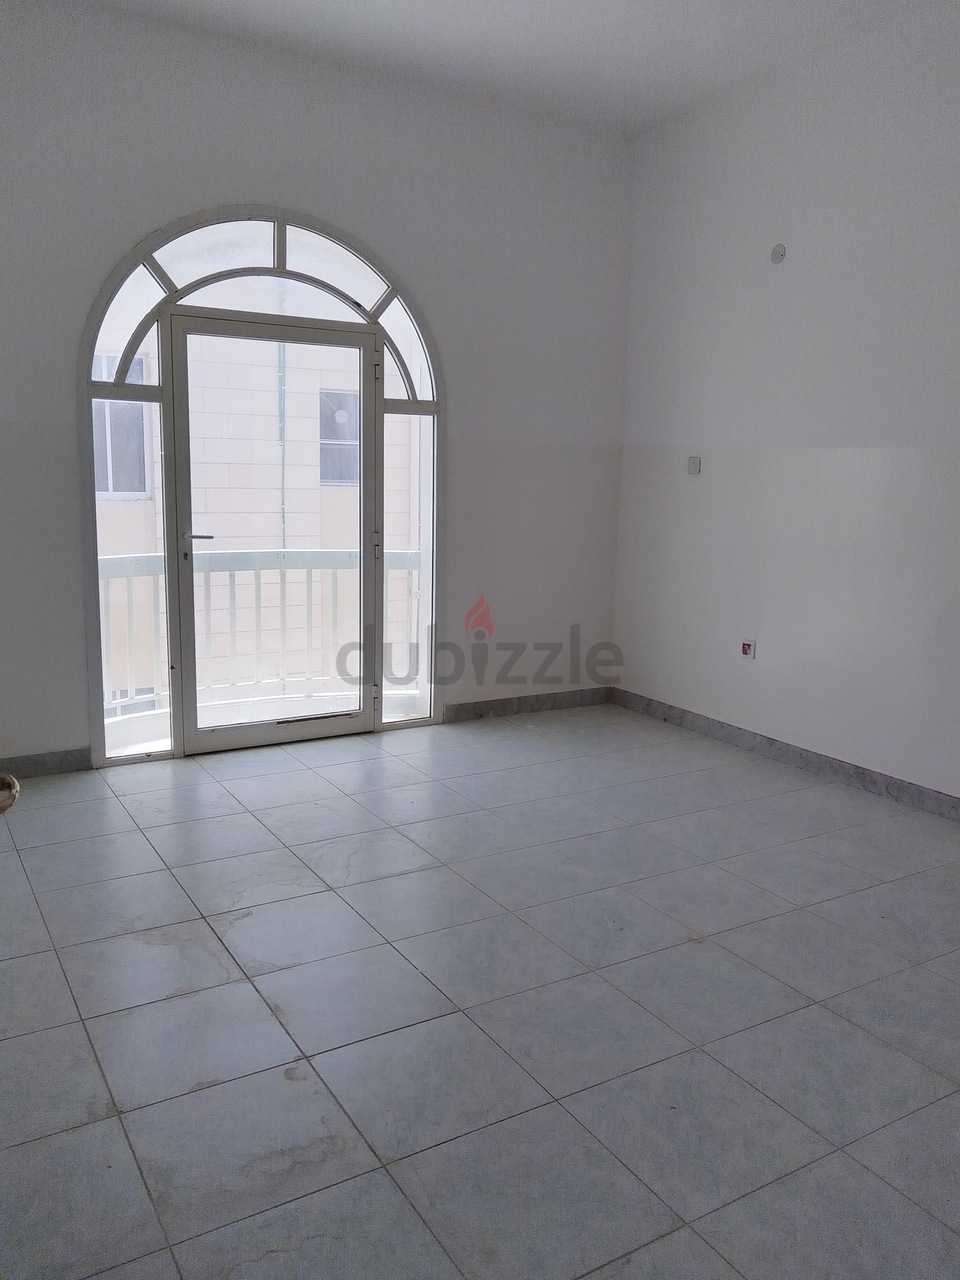 Studio Apartment For Rent In Asharej Including Water, Electricity And Wifi Near Tawam Hospital